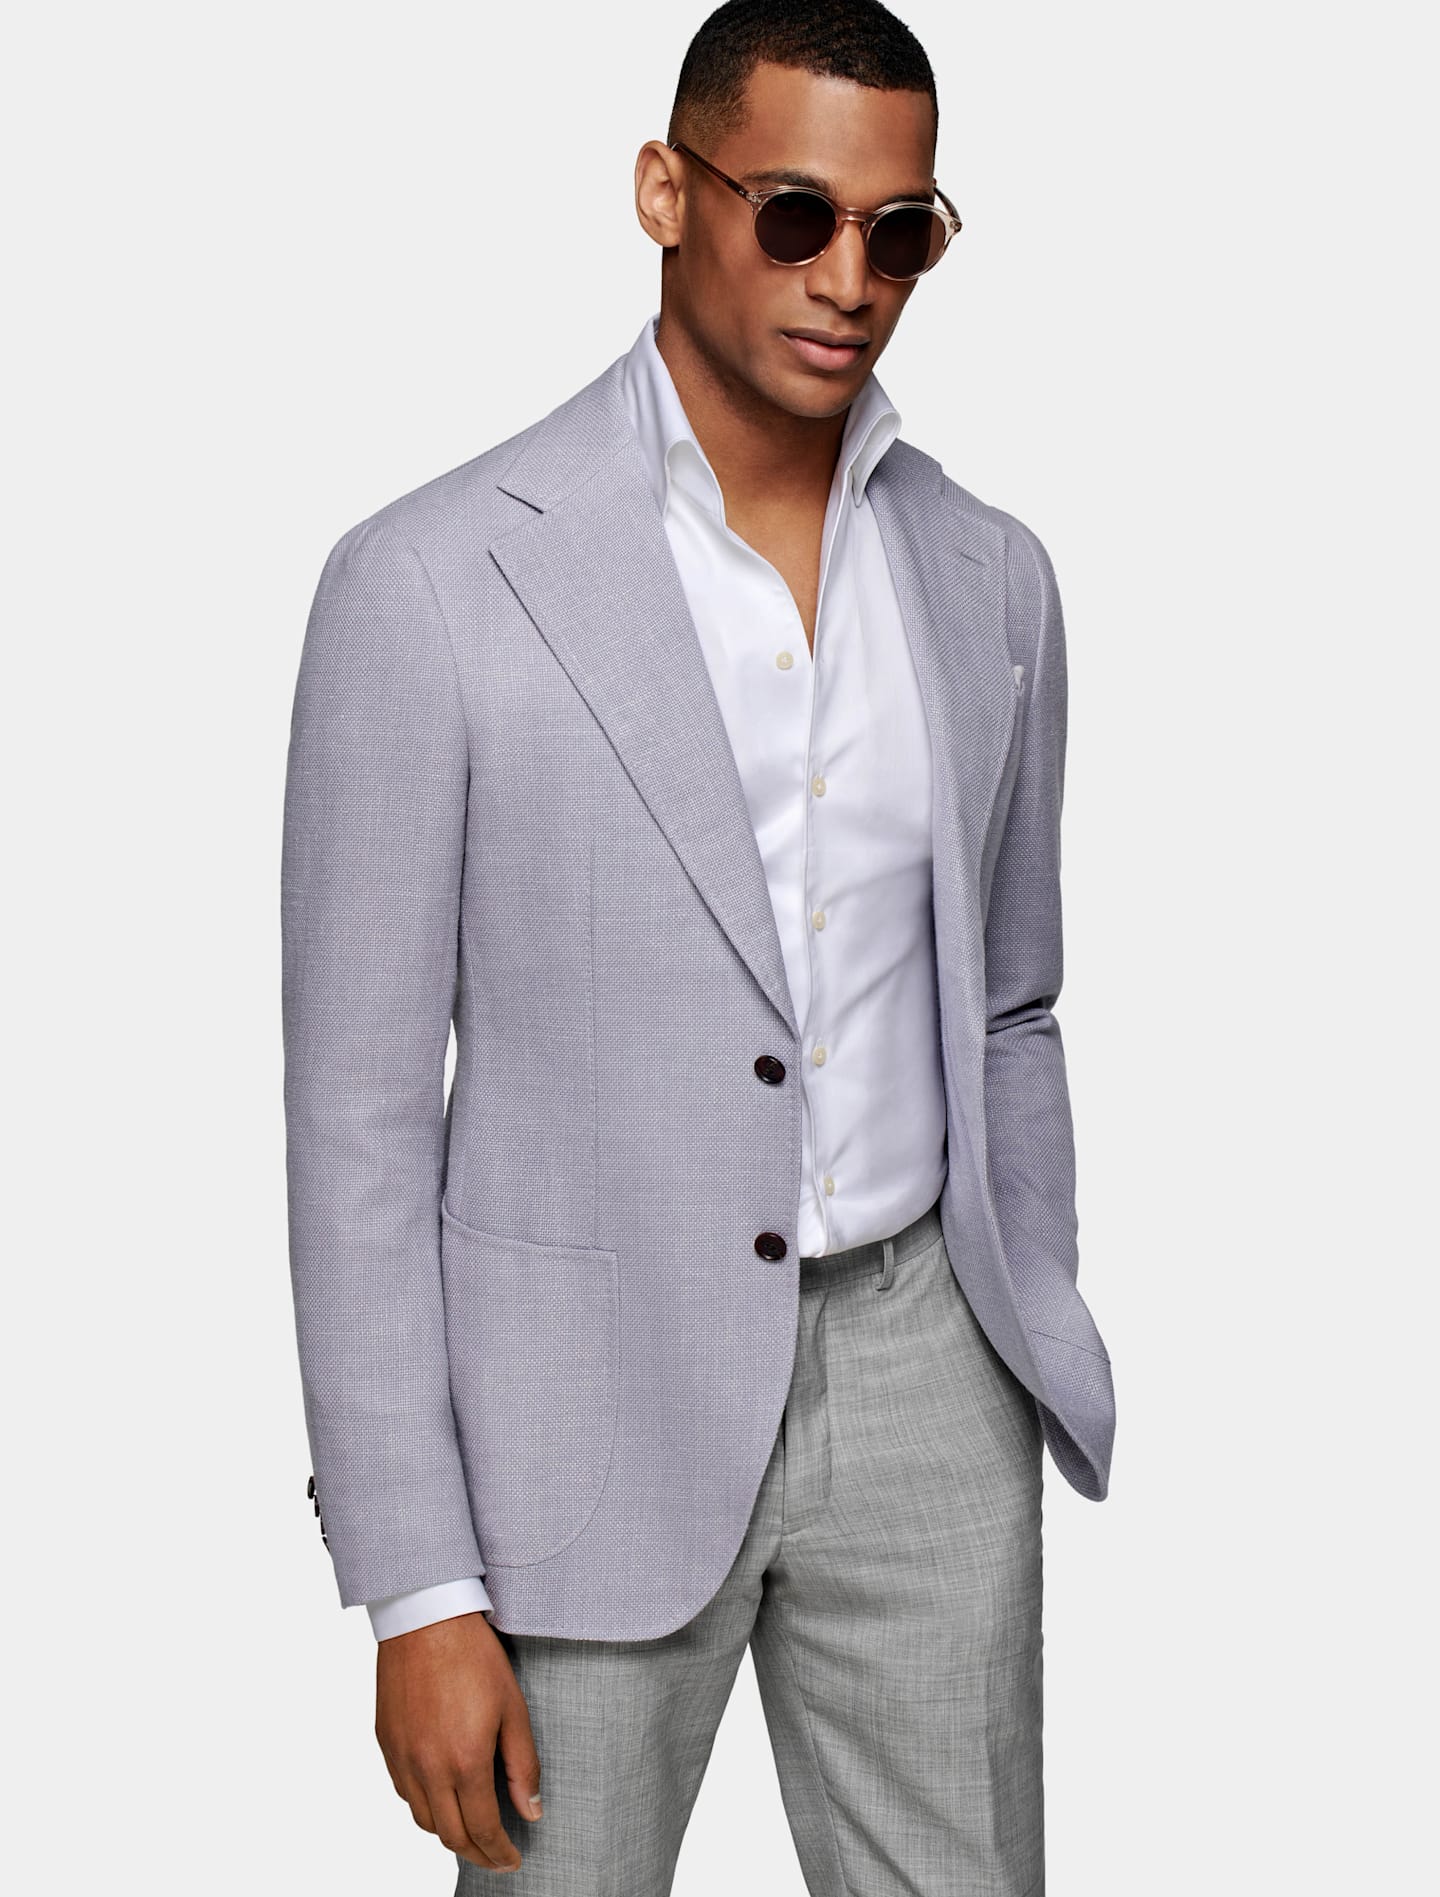 A lavender tailored jacket to complement a smart casual wedding code.